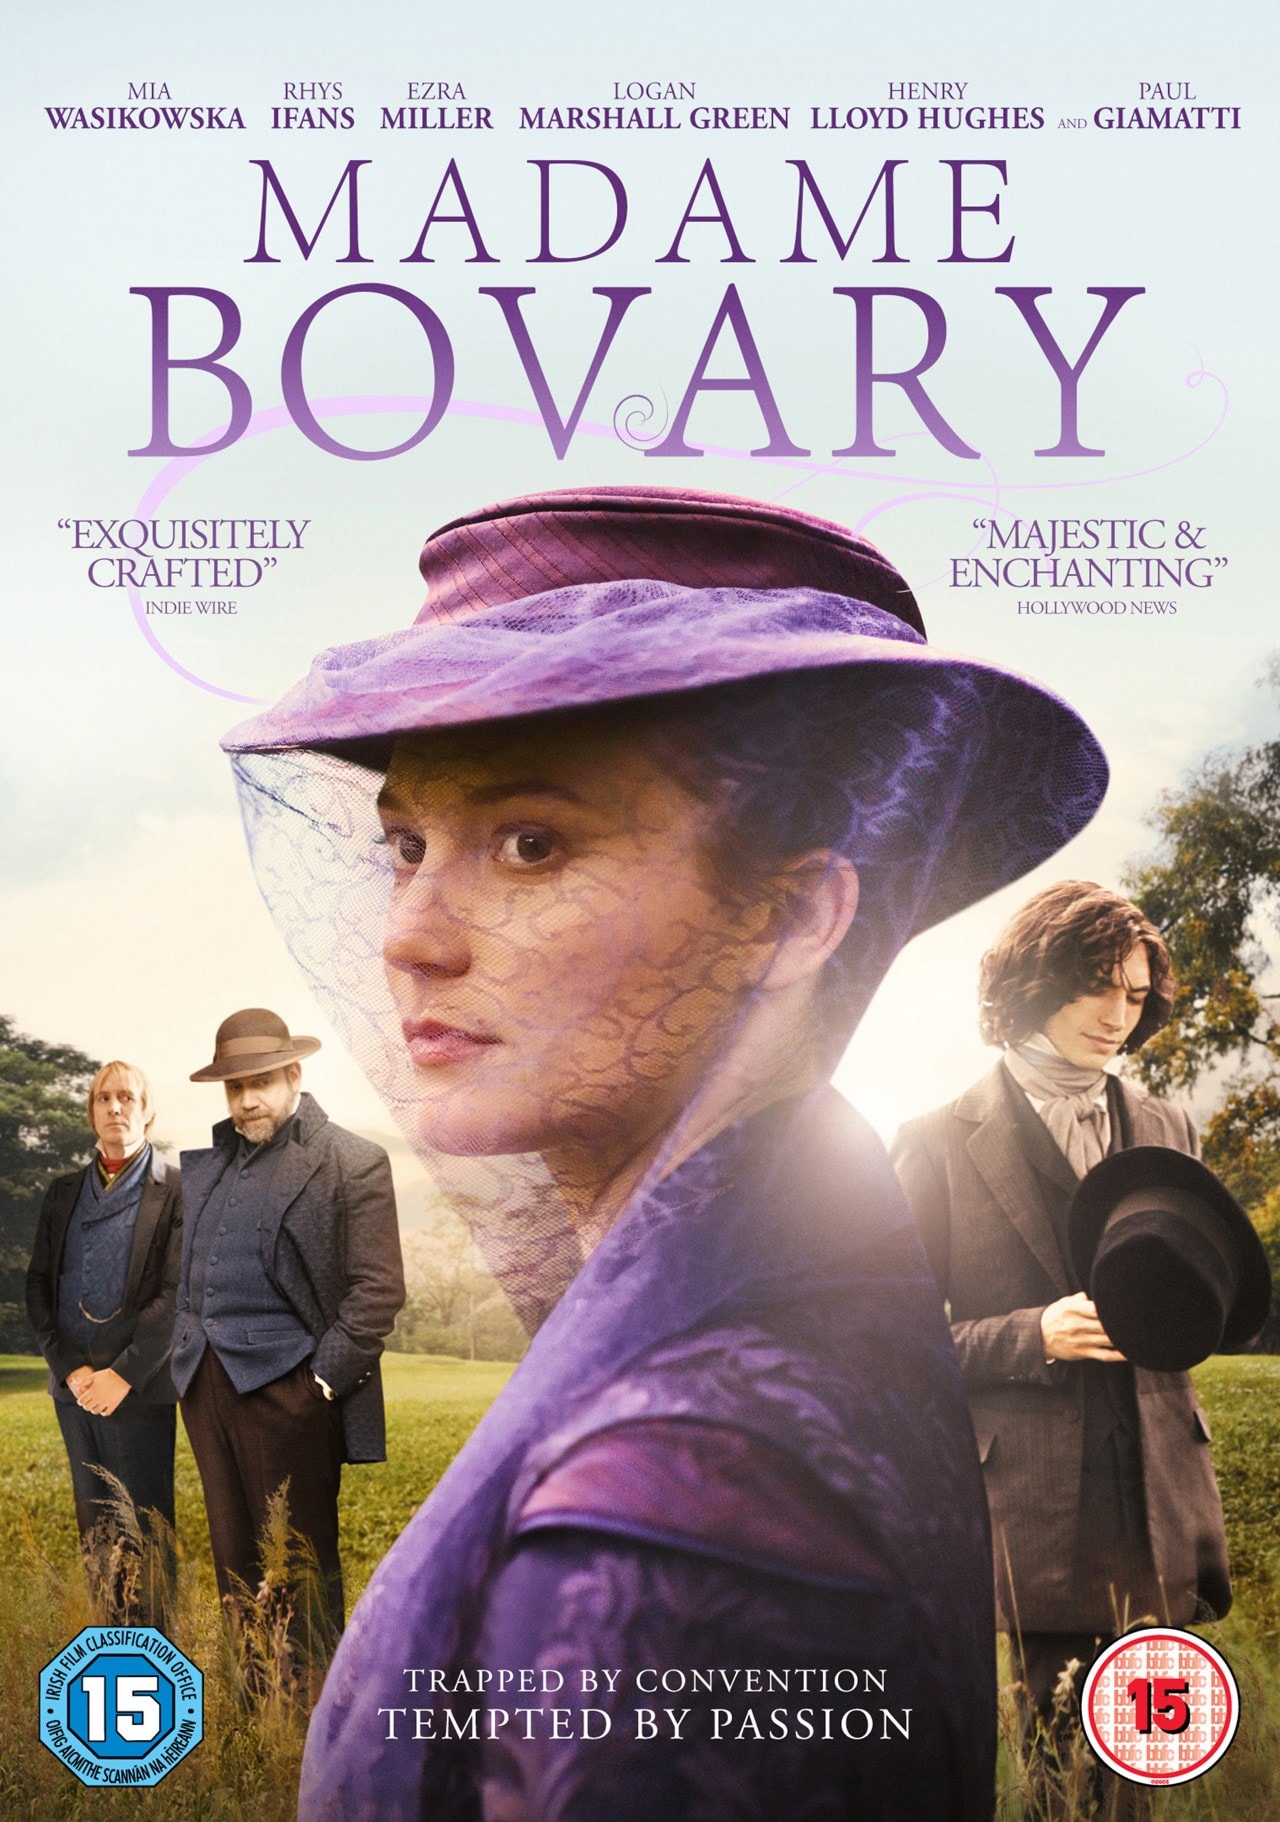 Madame Bovary downloading